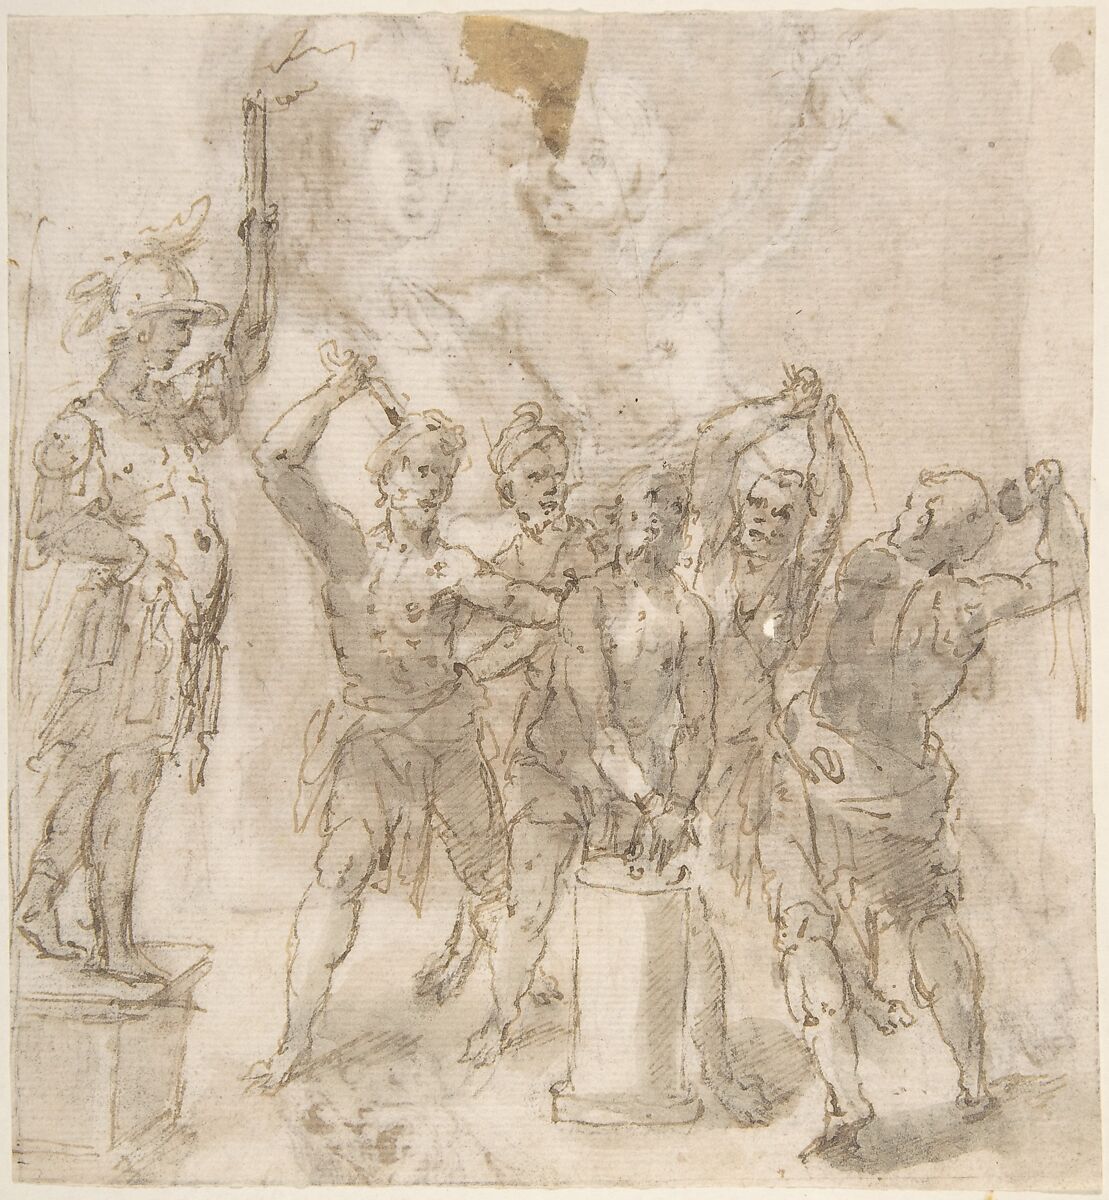 The Flagellation of Christ (recto); Madonna and Child and Unrelated Figure Studies (verso), Anonymous, Spanish, School of Seville, 17th century, Pen and brown ink with brush and gray-brown wash over traces of black chalk underdrawing (recto). Composition outlined in black chalk. On off-white paper. Pen and brown ink with brush and gray-brown wash over traces of black chalk underdrawing (verso) 